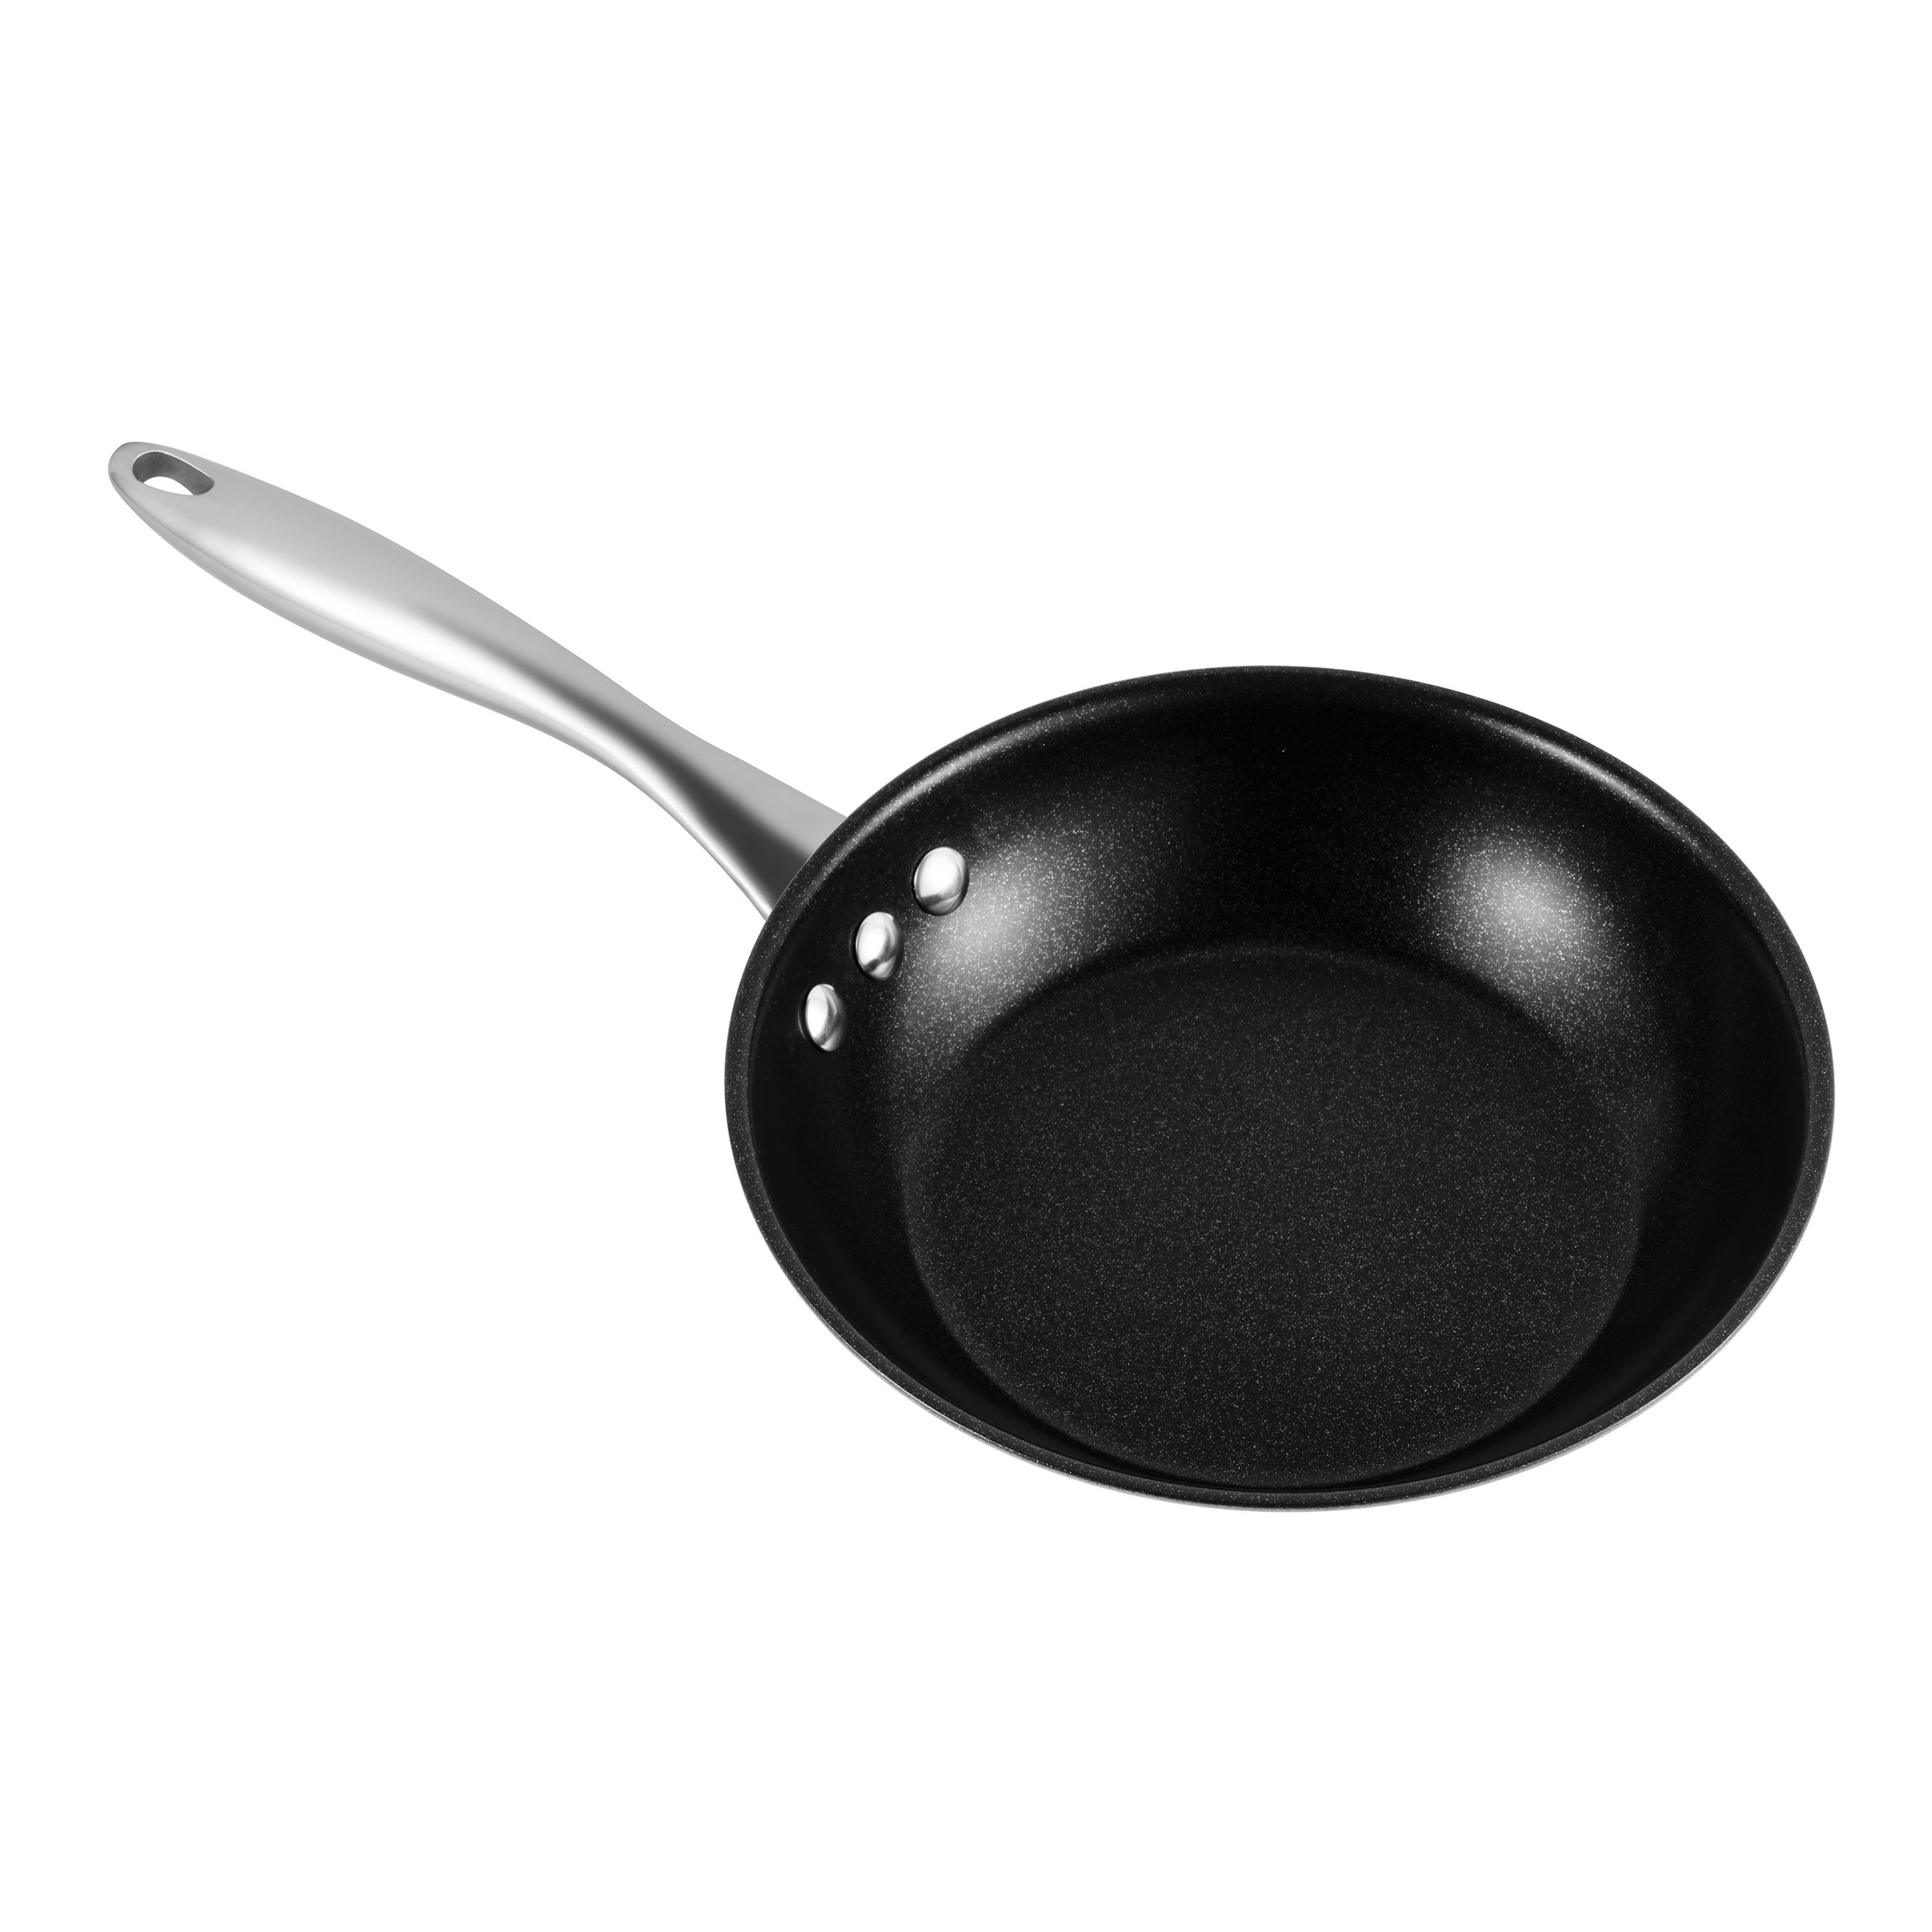 Elly's Pan Release Recipe (DIY non-stick pan coating) — Elly's Everyday